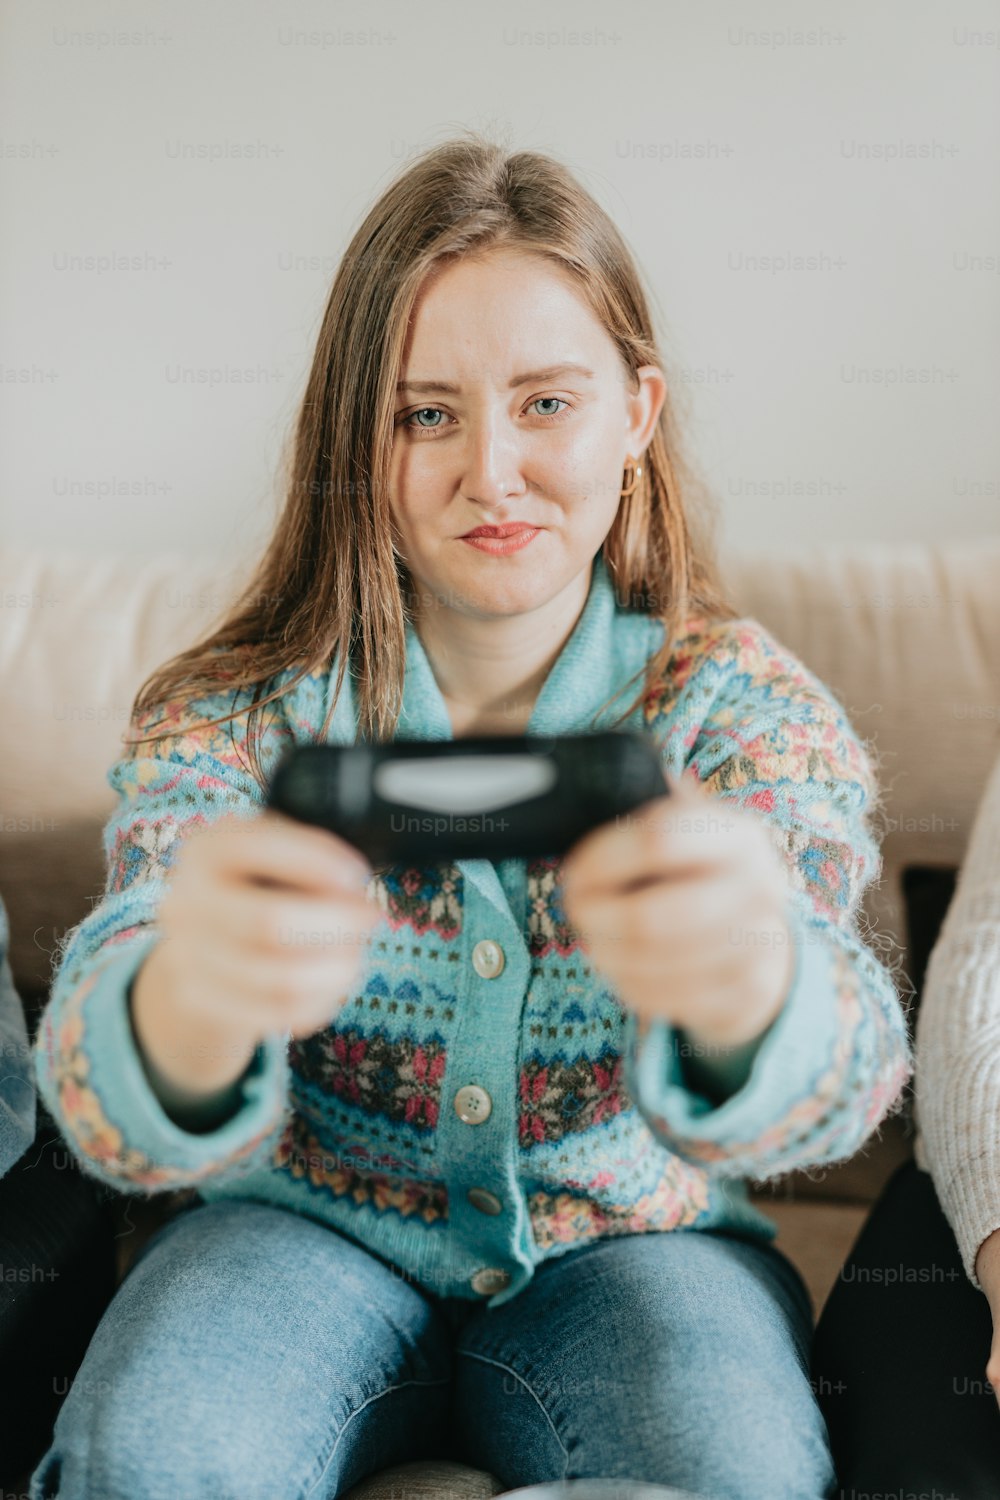 a woman sitting on a couch holding a remote control